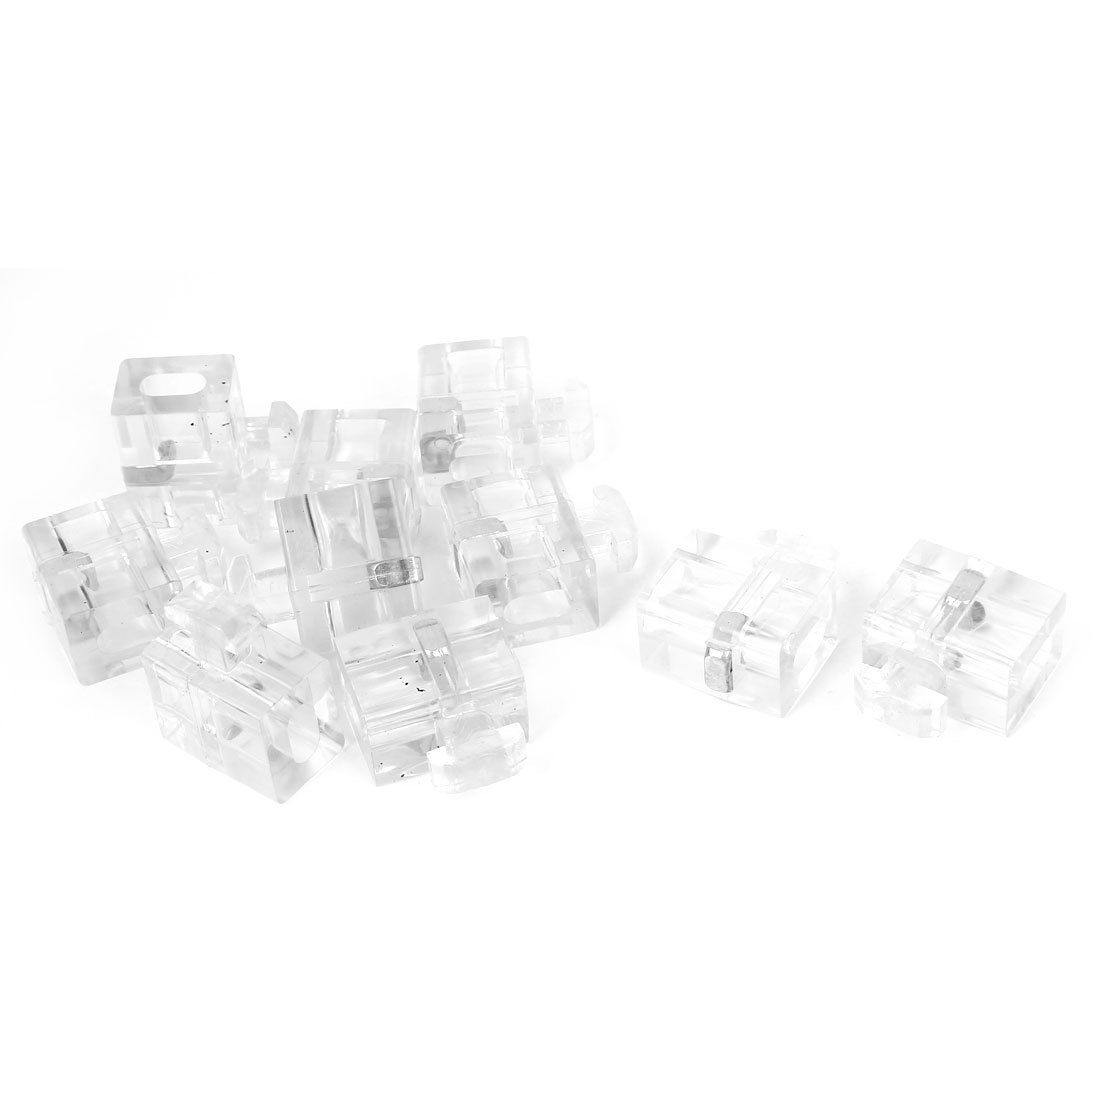 45 Series Aluminium fittings Spacer Partitions Glass connection block type A -Pack of 1 - Extrusion and CNC